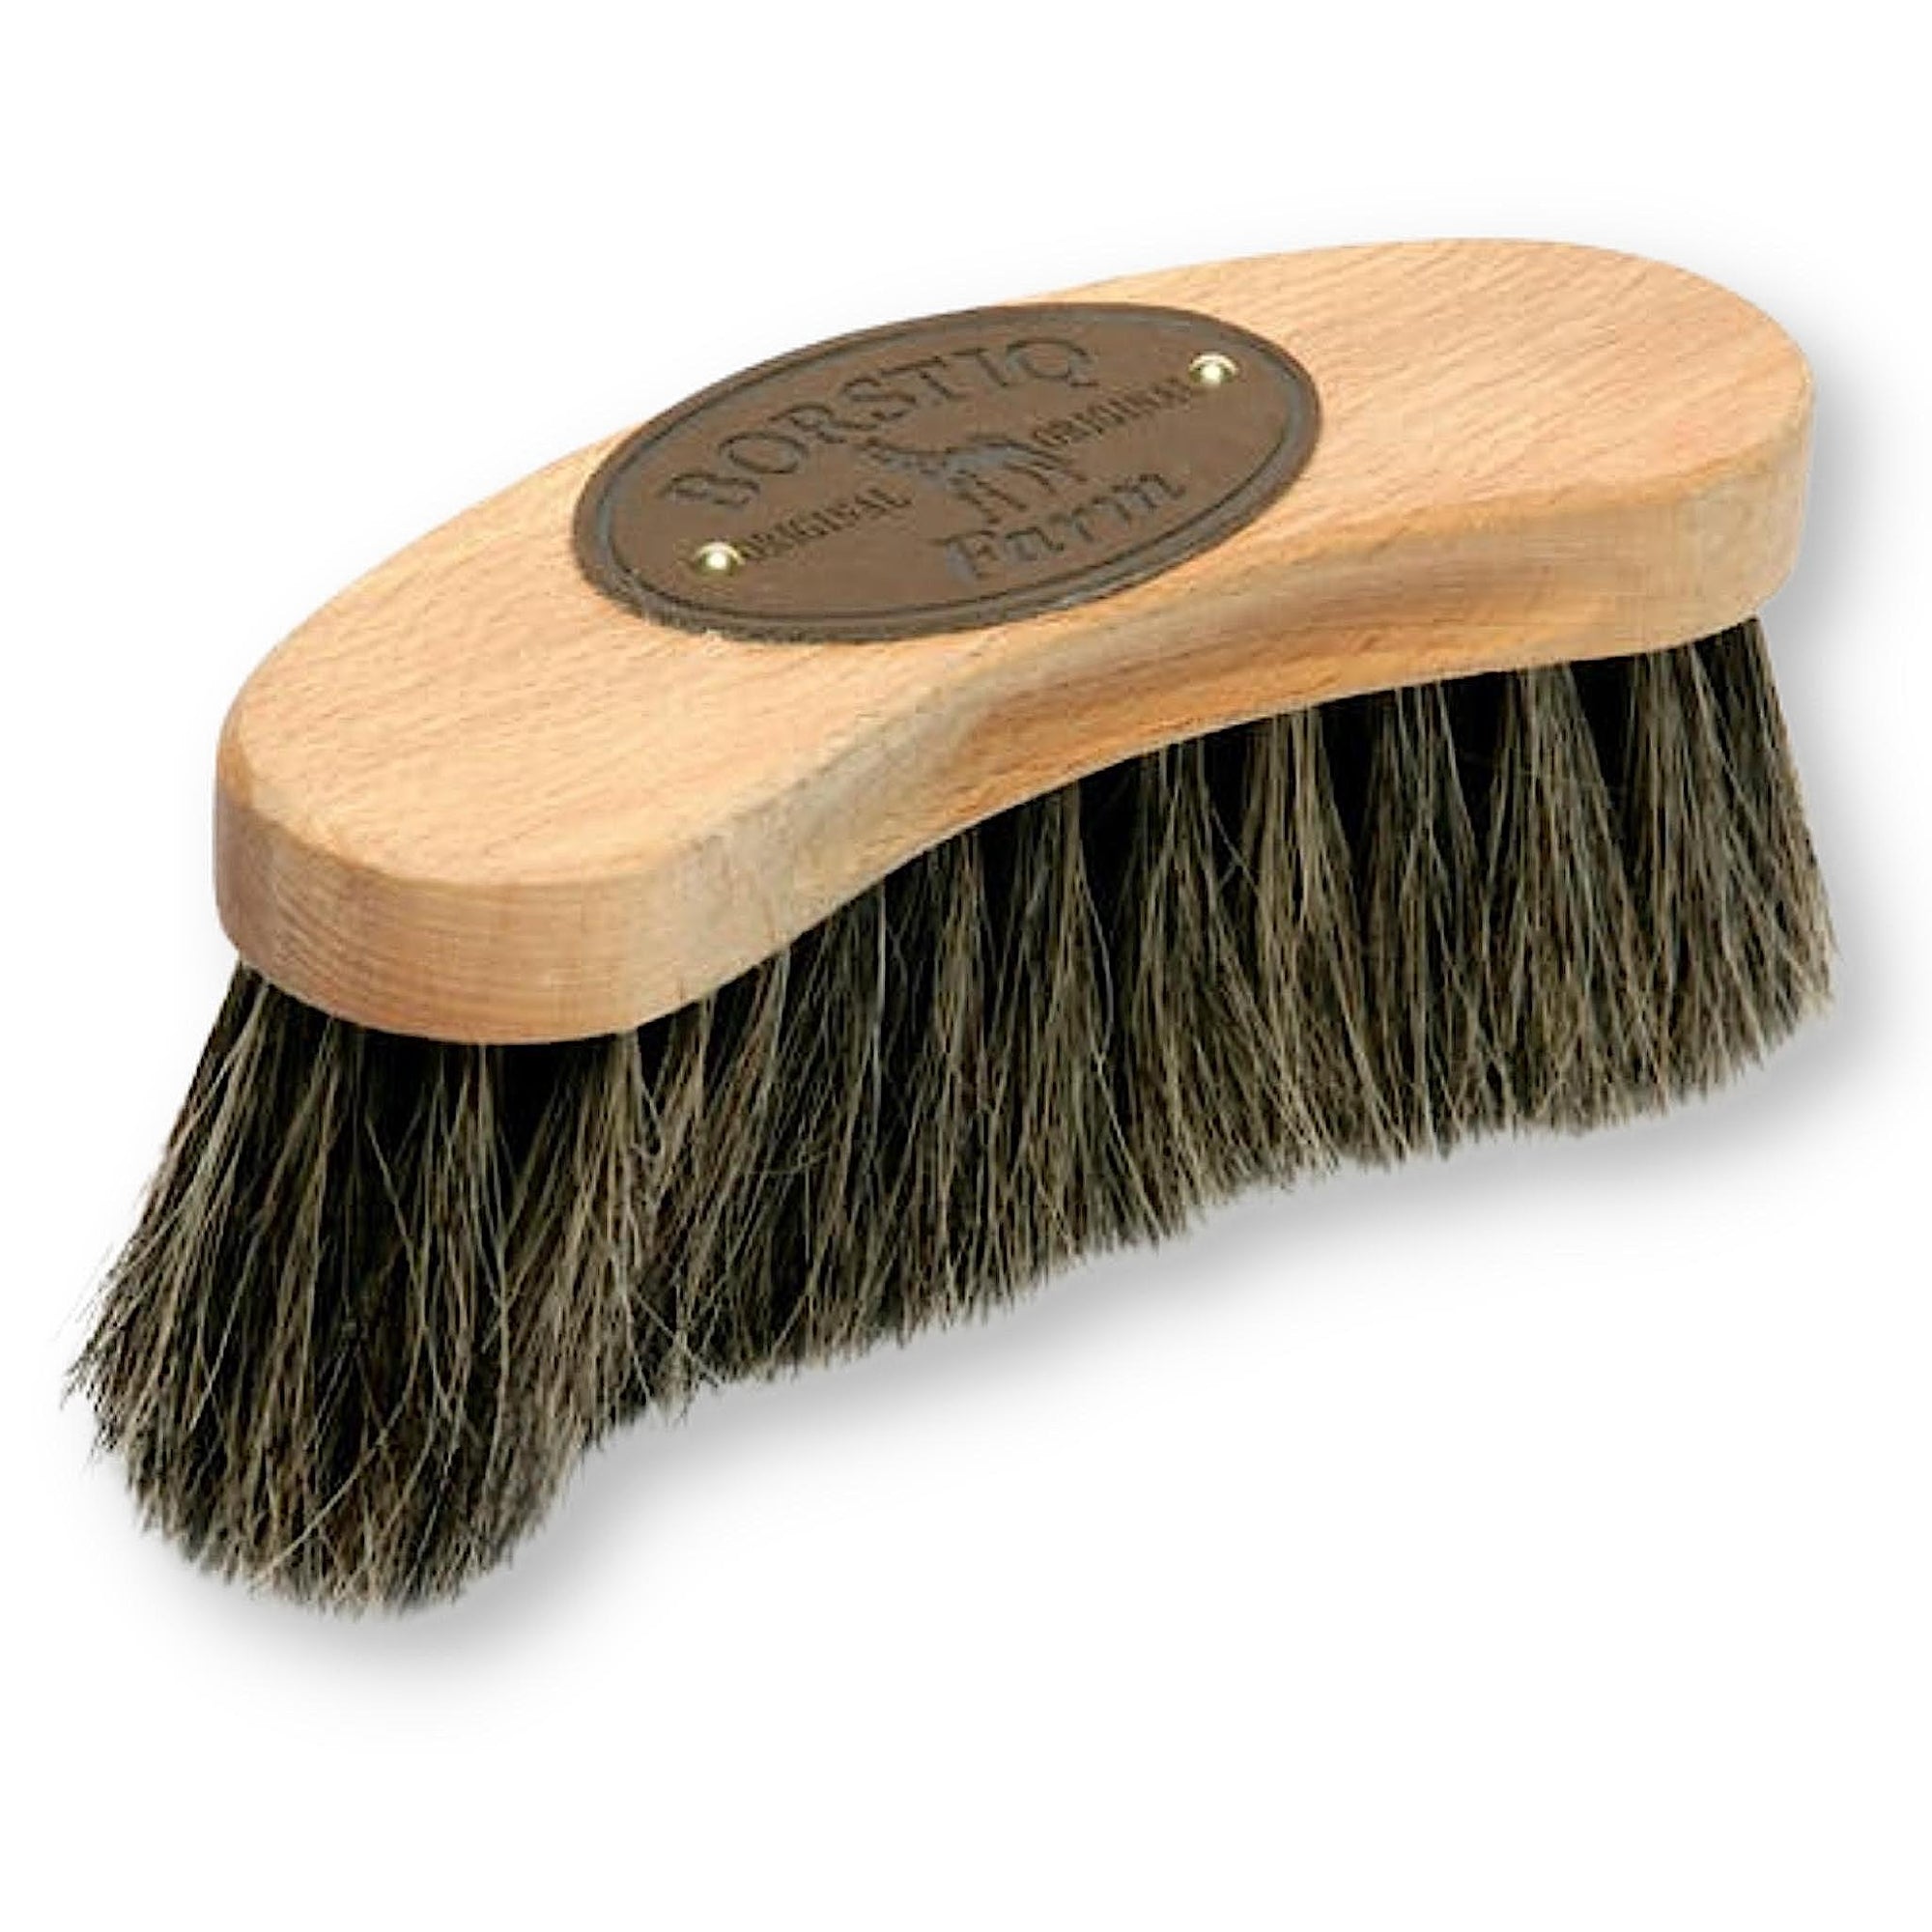 Curved brush with wooden handle and brown soft bristles. 